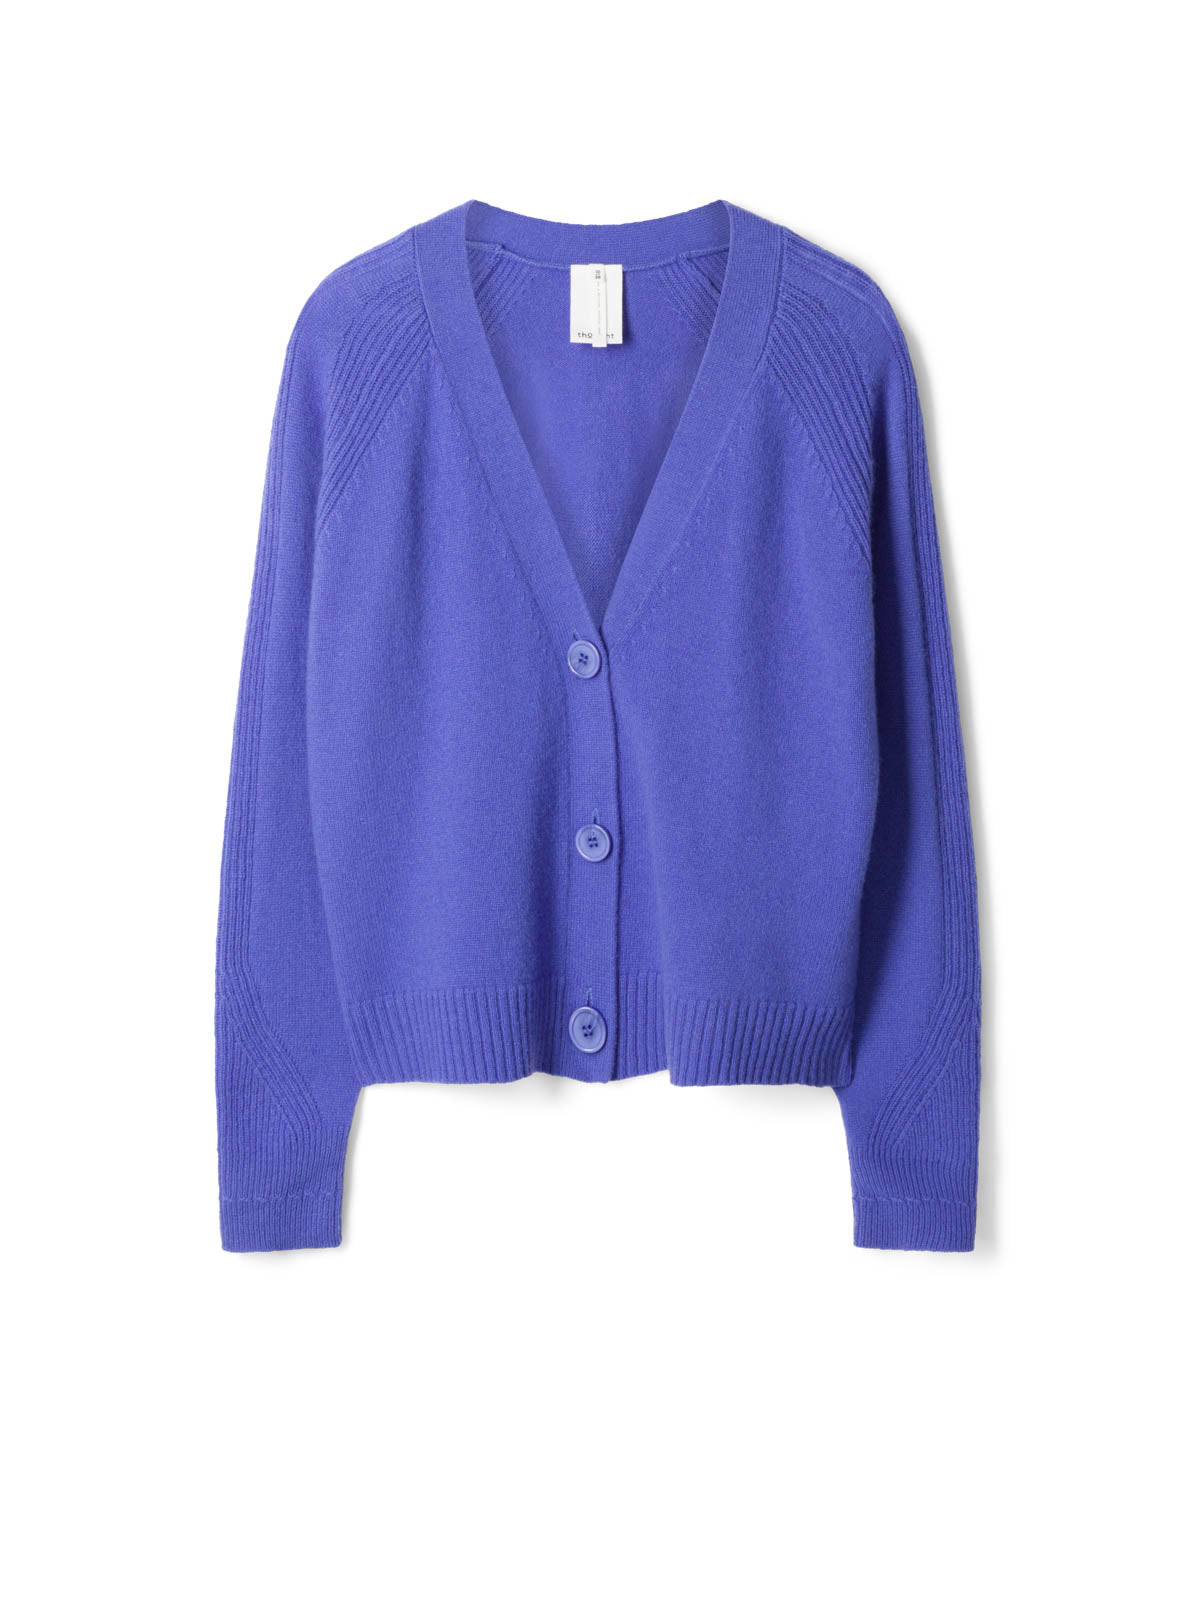 Taygete Lambswool V-Neck Cardigan - Periwinkle Blue